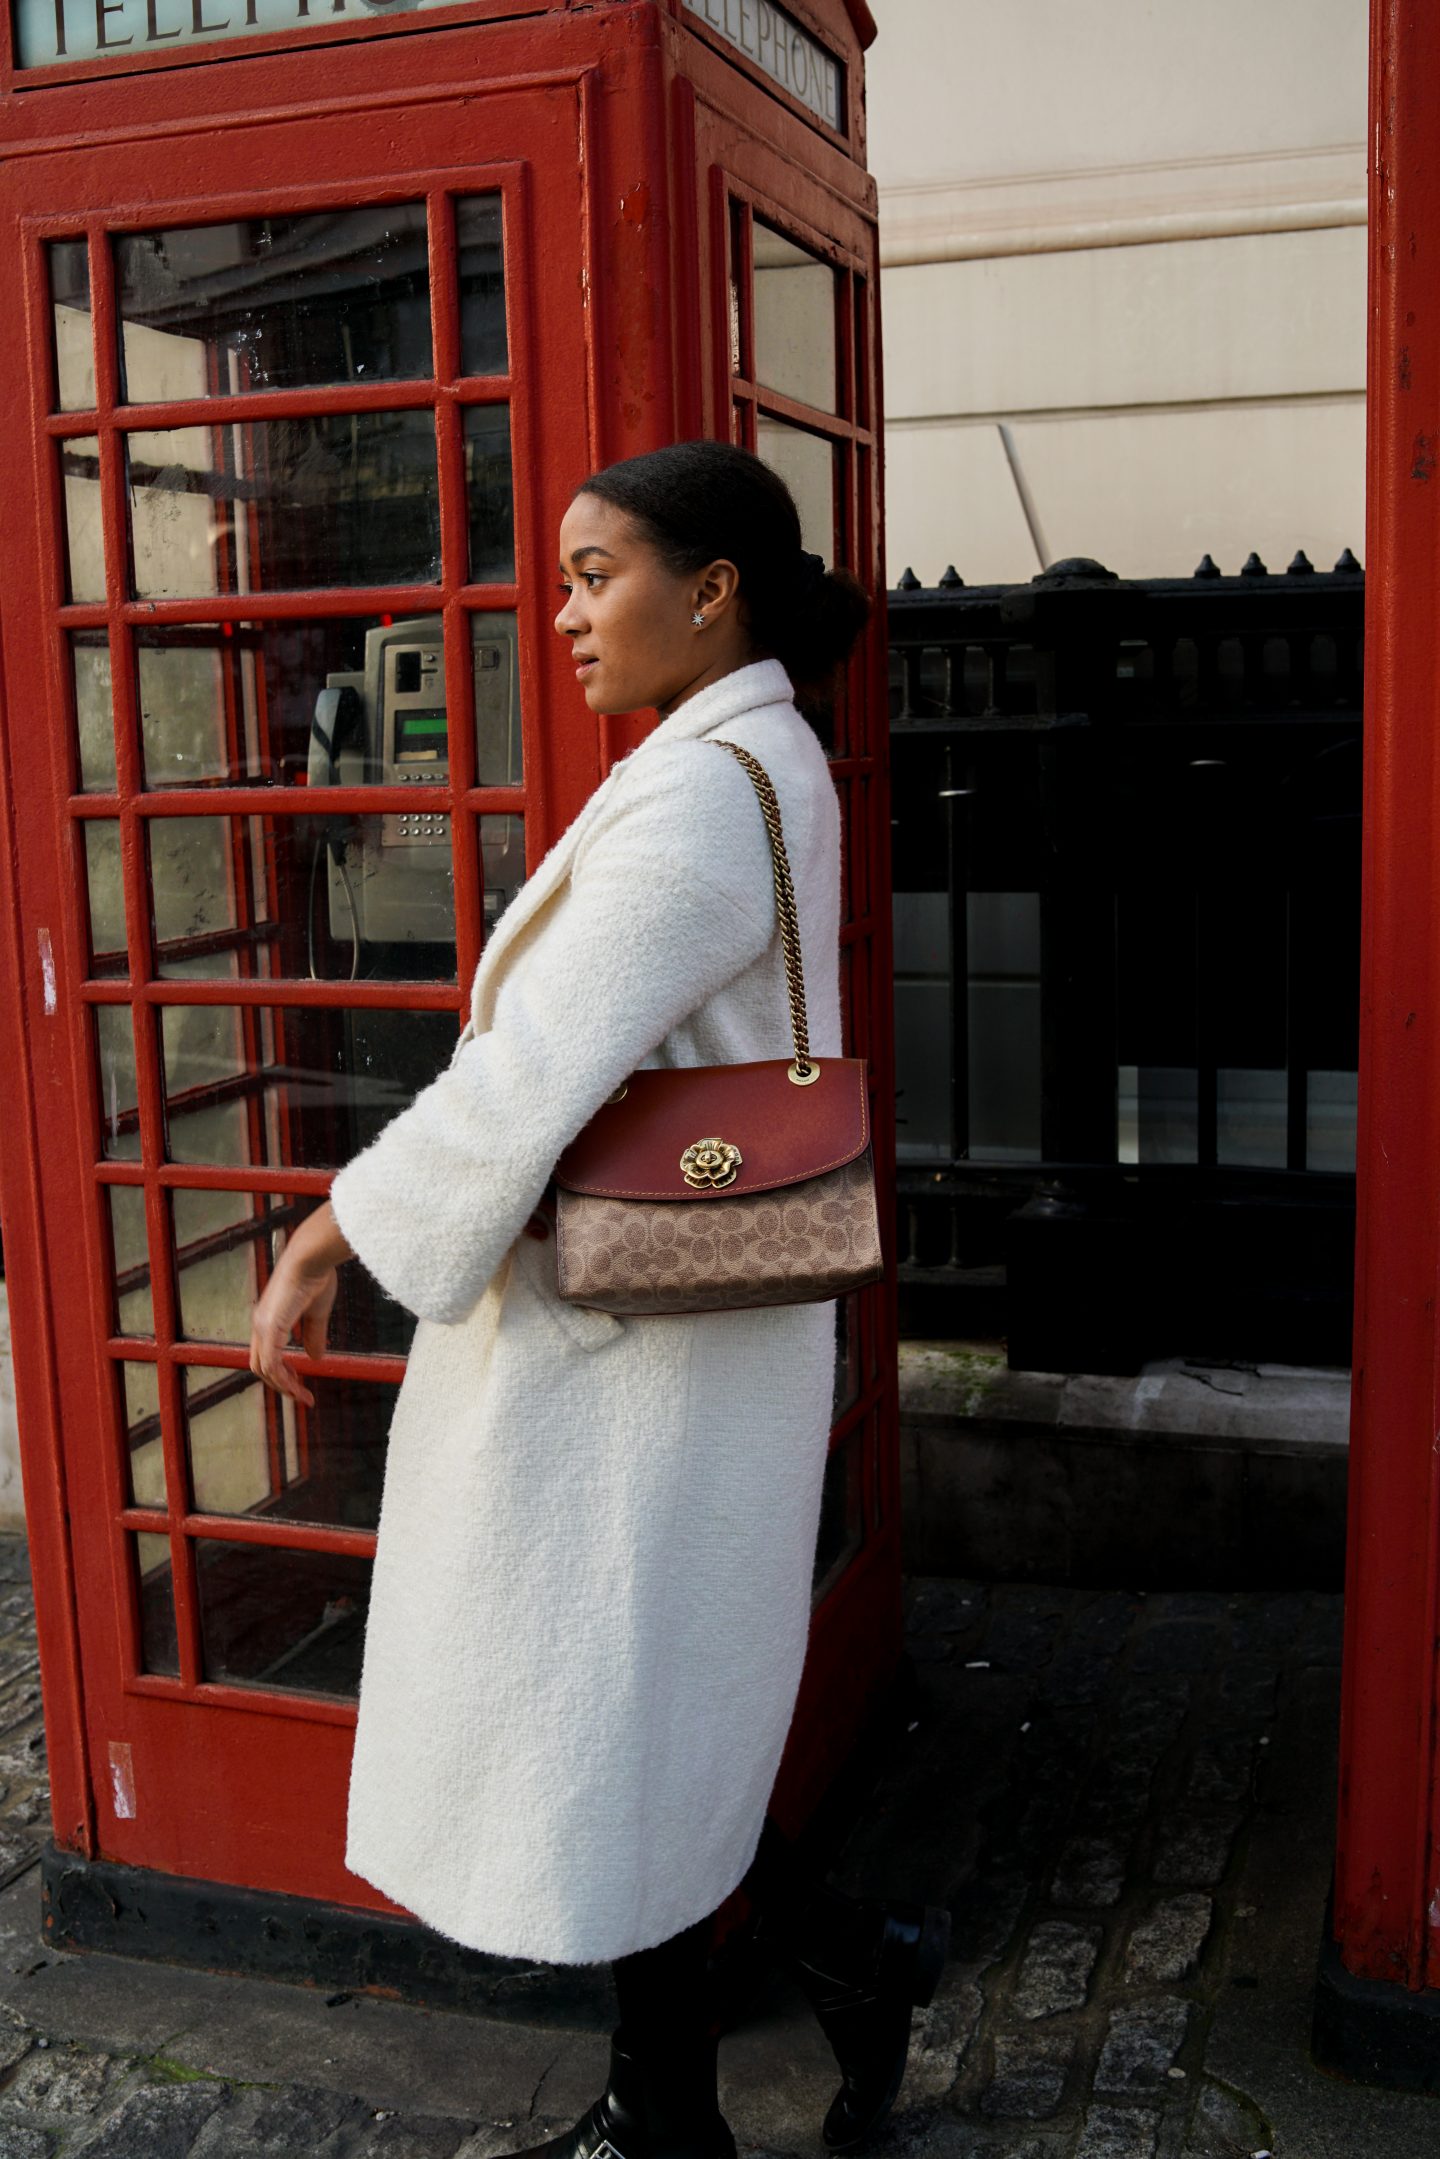 London Fashion Blogger Red Phone Booth